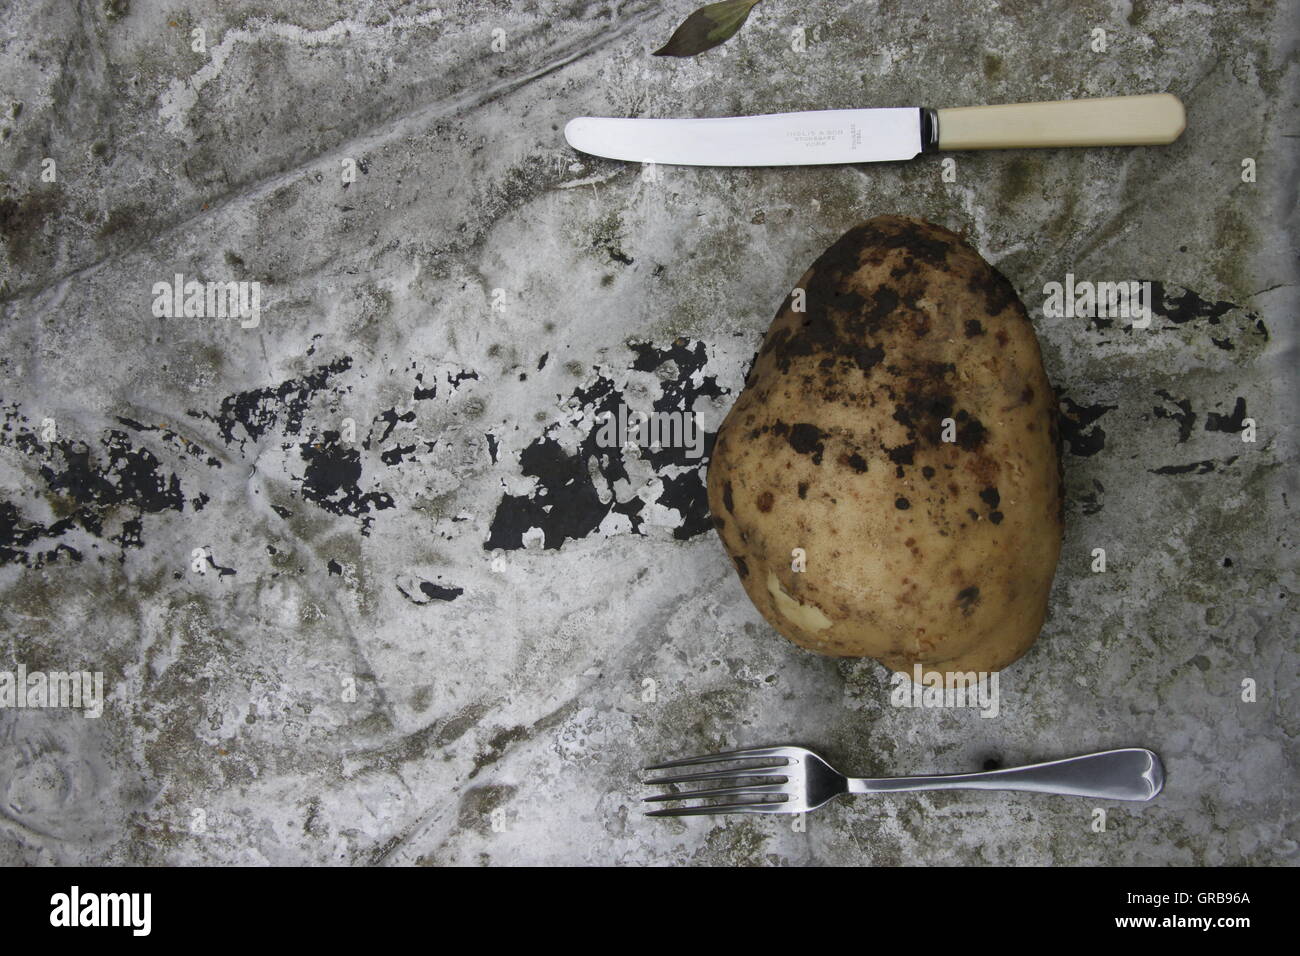 https://c8.alamy.com/comp/GRB96A/very-large-home-grown-potato-with-knife-and-fork-on-garden-table-beverley-GRB96A.jpg